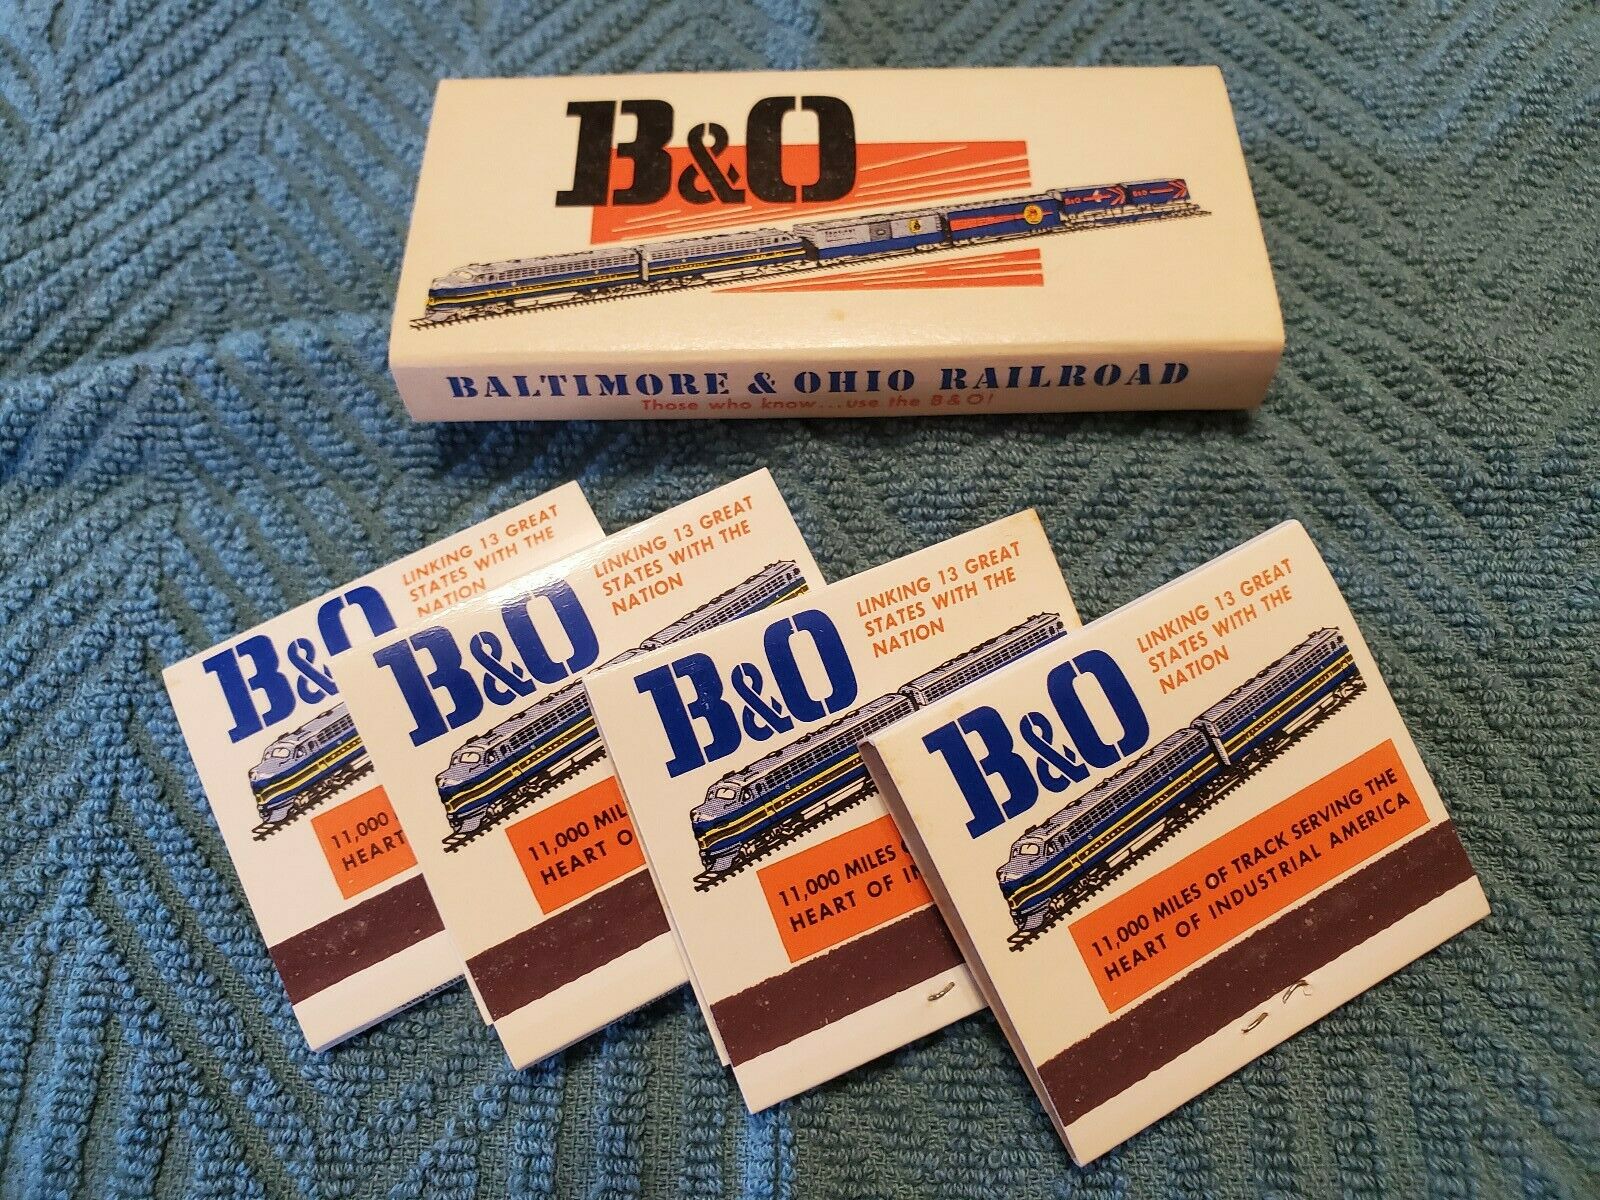 Rare Vintage B&o Baltimore & Ohio Railroad Matchbooks - 4 Pack With Sleeve